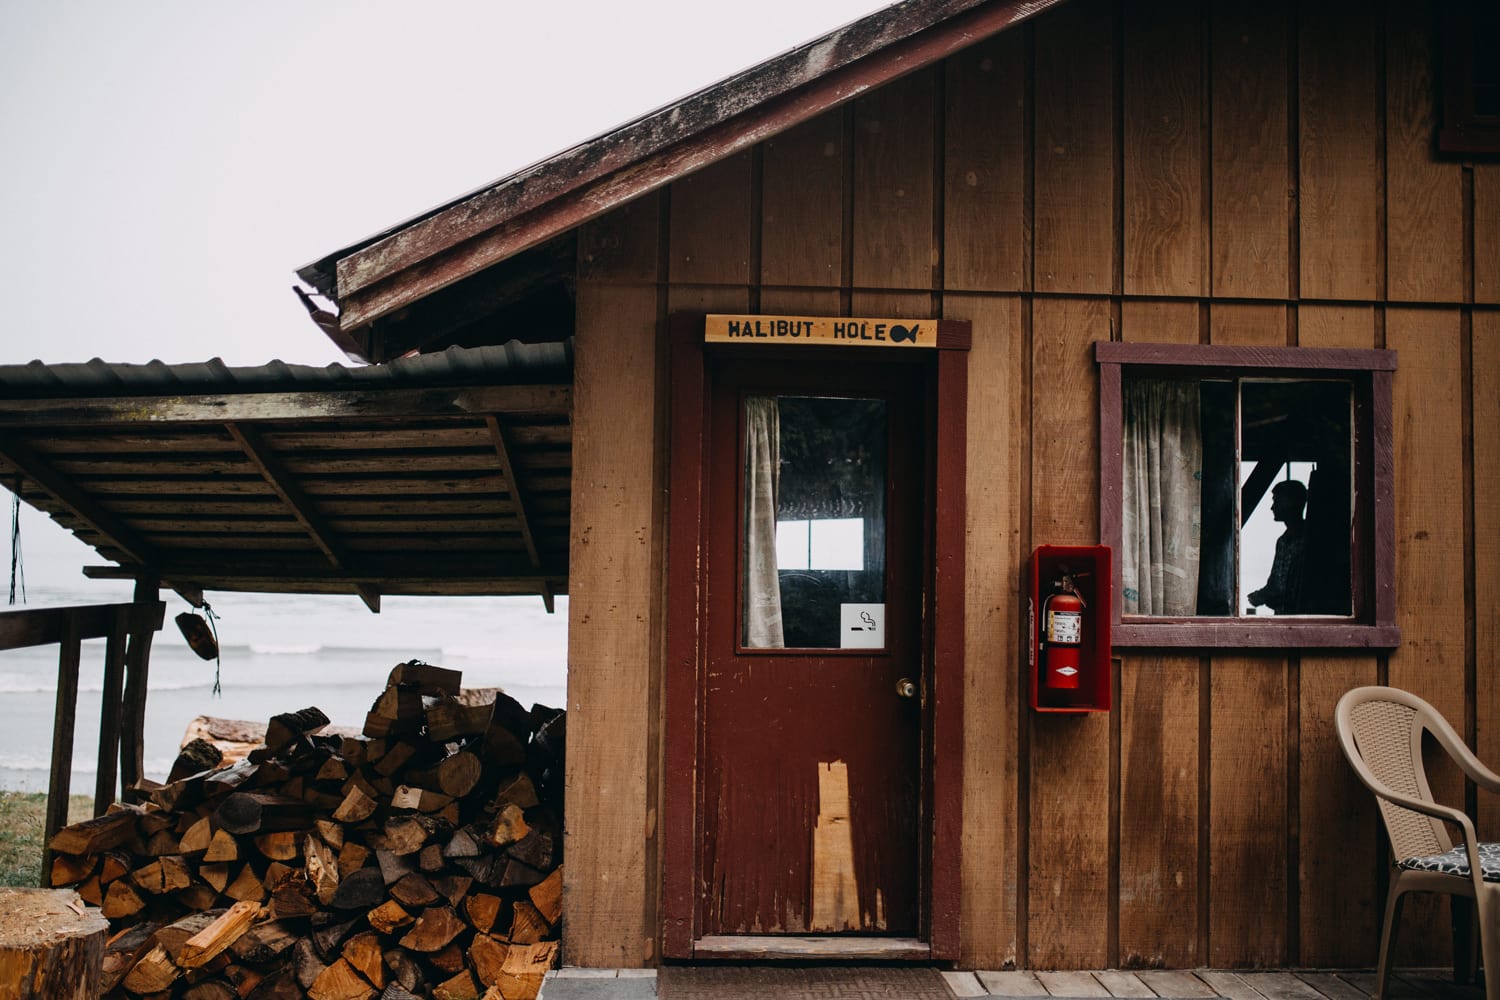 cabin in the olympic peninsula where you can see the groom's shadow silhouette in the window as he's getting ready with a a sign that says "halibut hole" above the door by marcela pulido portland wedding photographer